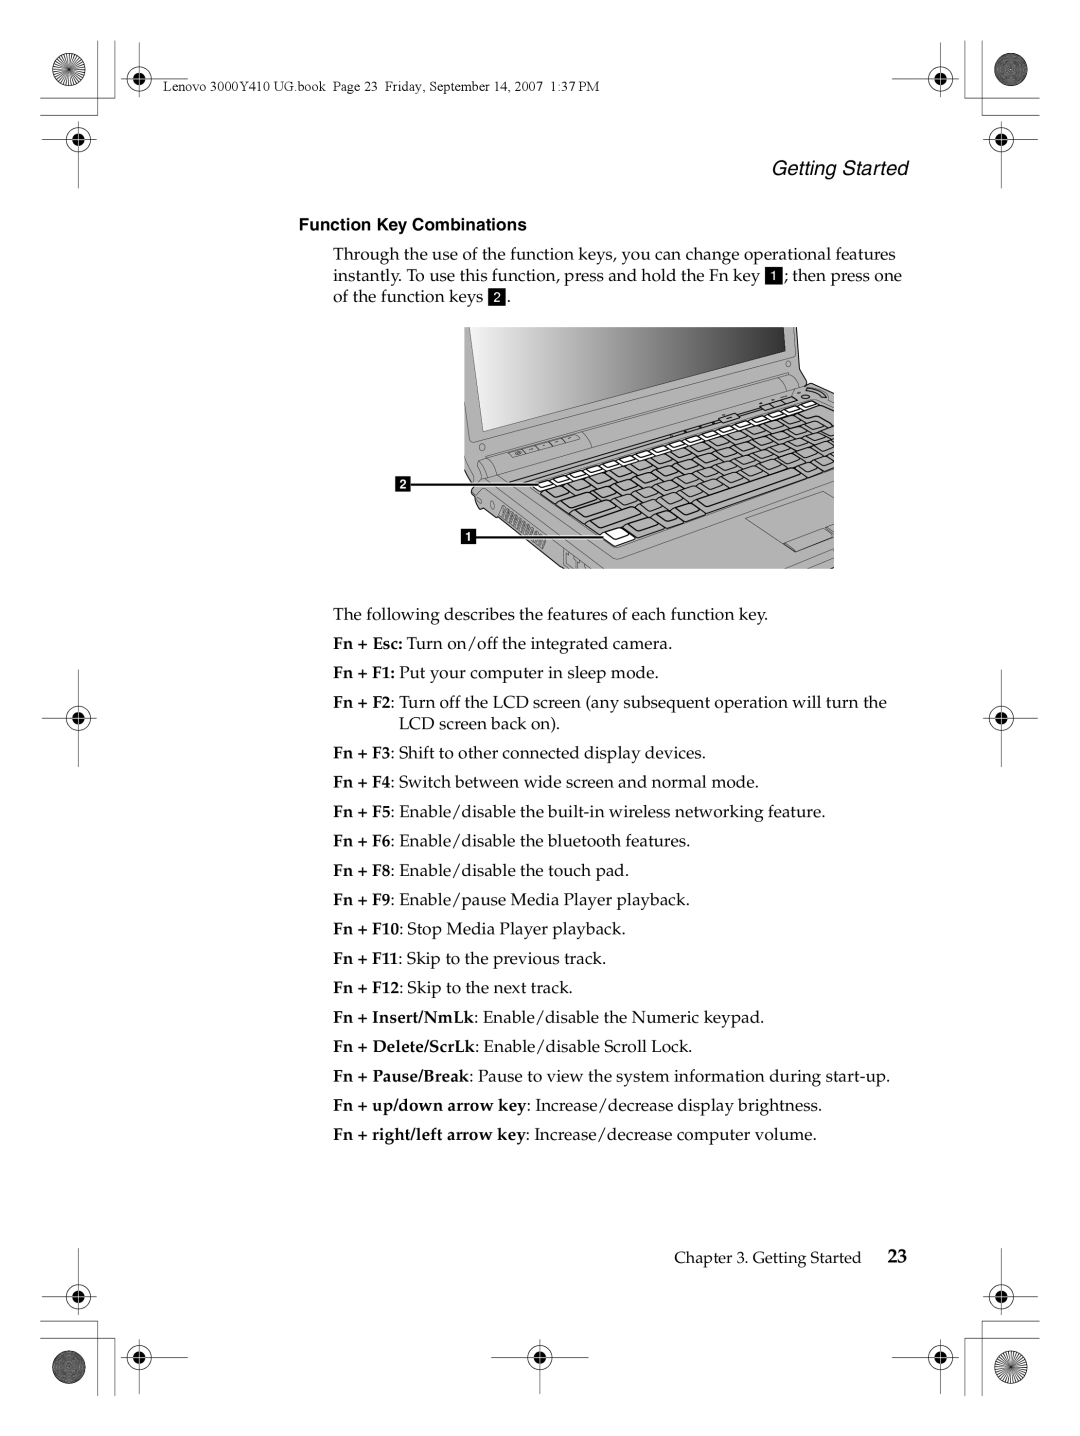 Lenovo 3000 Y410 warranty Getting Started, Function Key Combinations 